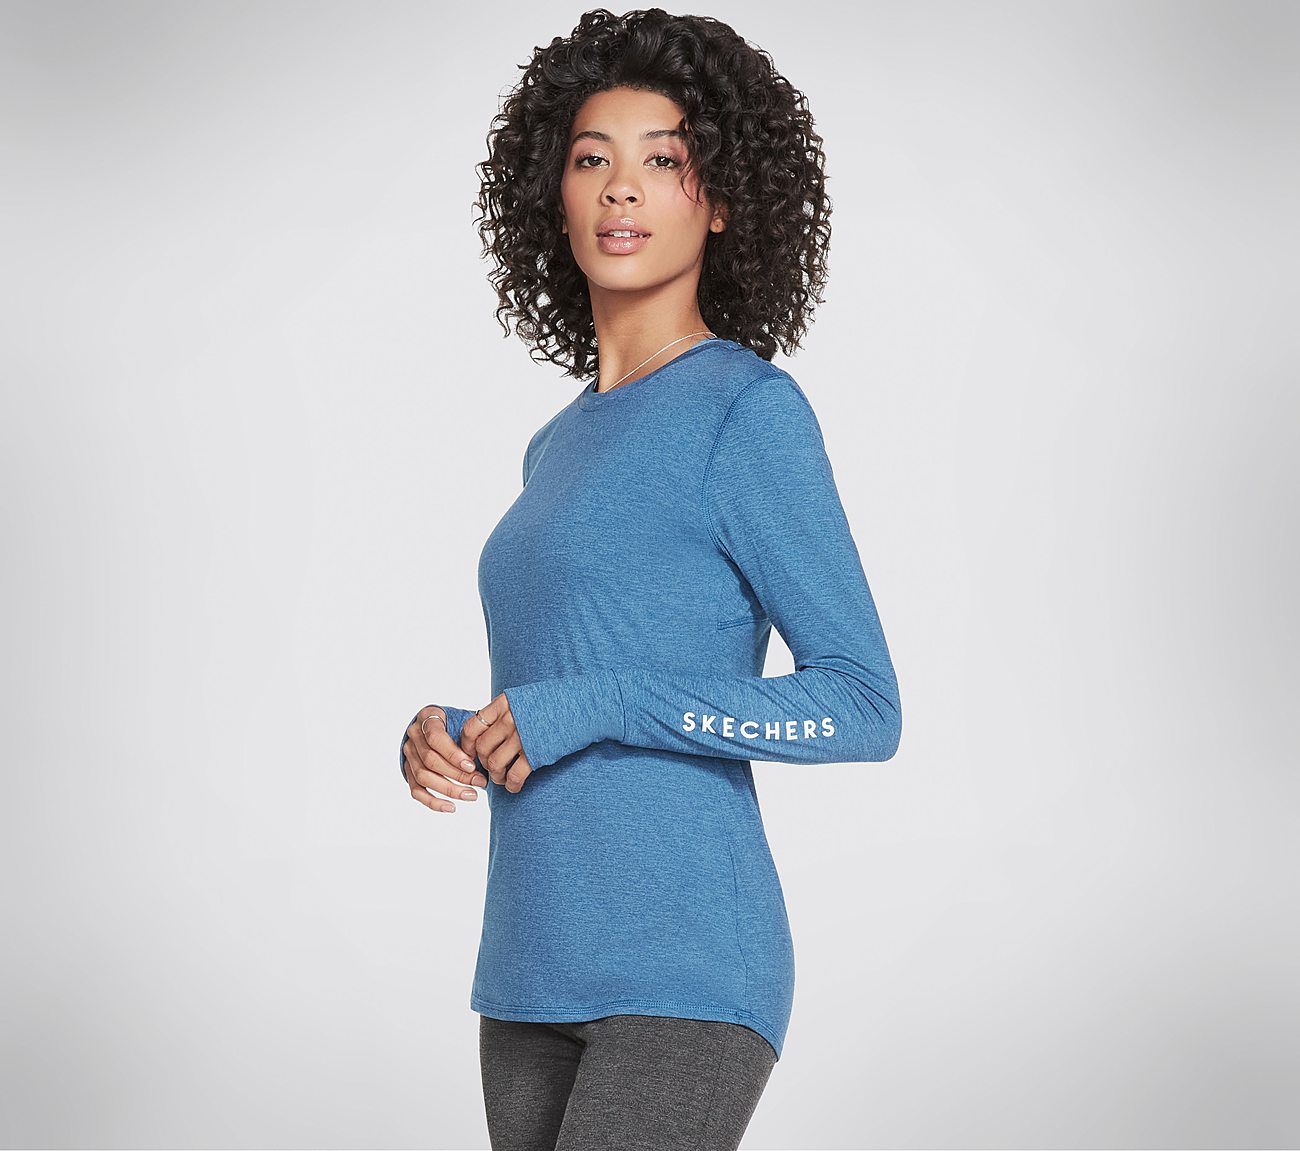 FLOW LONG SLEEVE TOP, BLUE/GREY Apparel Lateral View